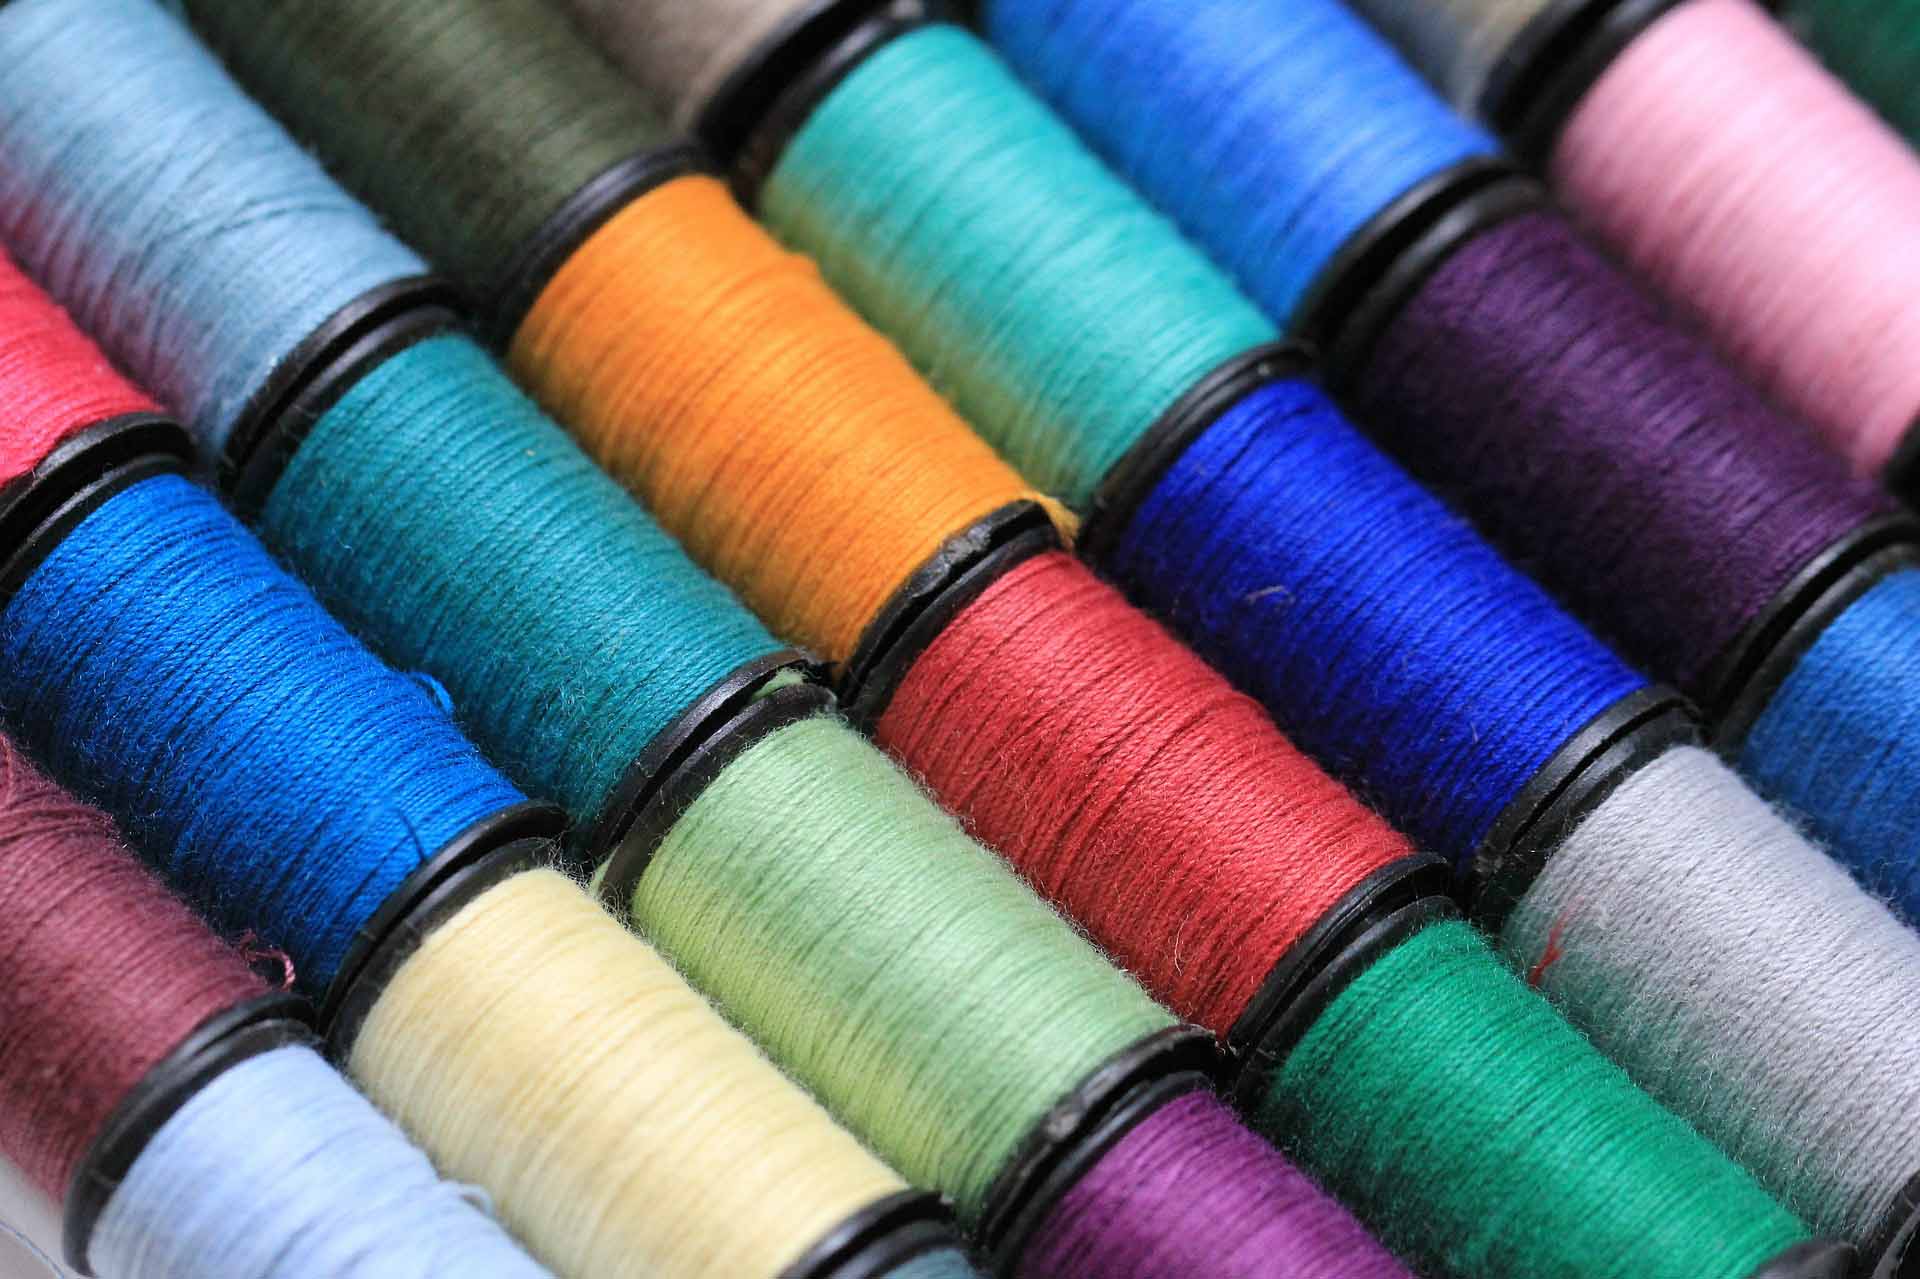 Which Embroidery Thread is Used in Sewing Felt - Mommy's Felt Toys